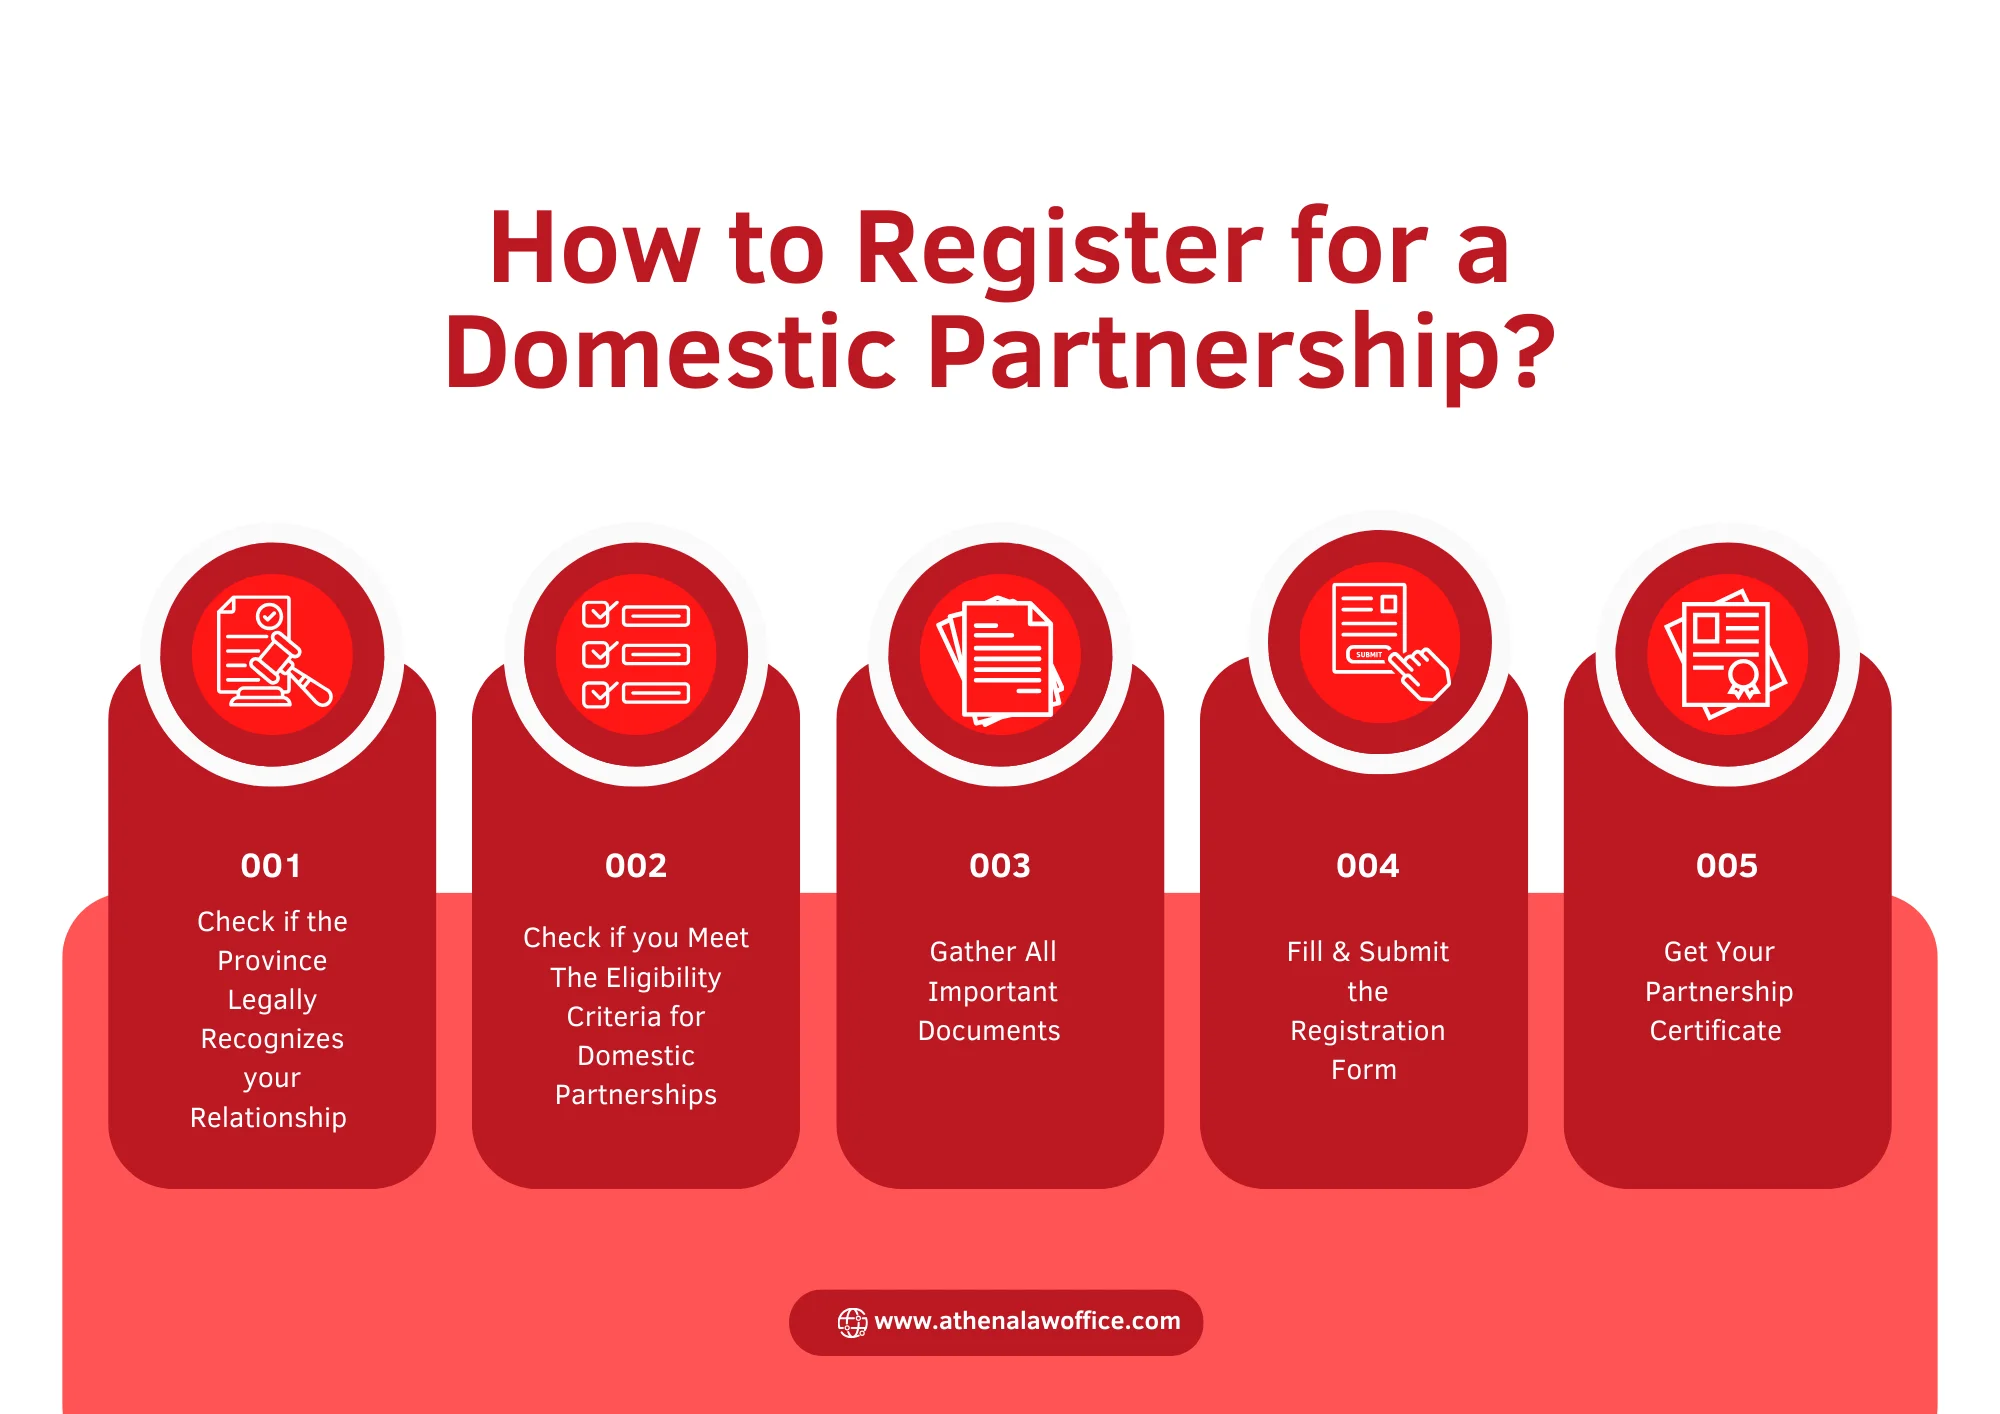 An infographic on how to register for a domestic partnership in canada